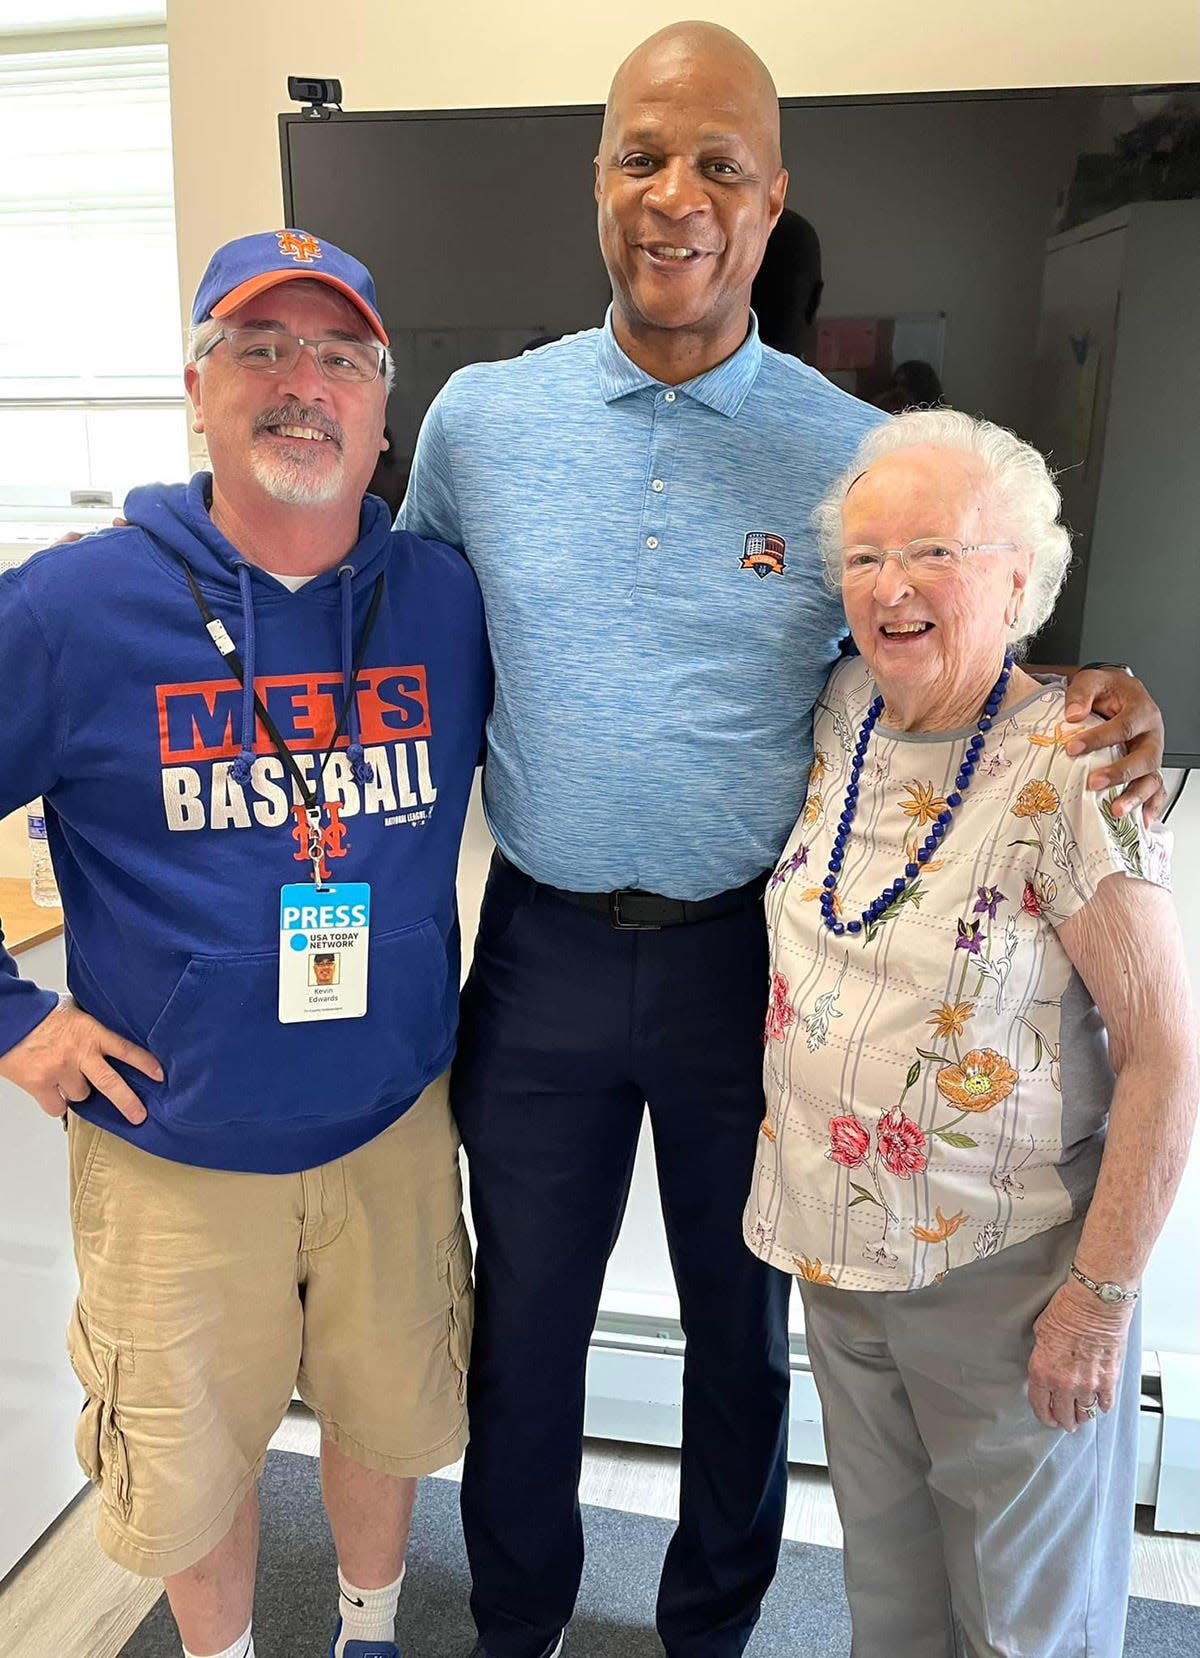 Former Major League Baseball star Darryl Strawberry suffered a heart attack on Monday, but has shared that he's on the road to a full recovery. Strawberry is pictured here with Sports Editor Kevin Edwards and Barbara Edwards during a recent visit to Honesdale.